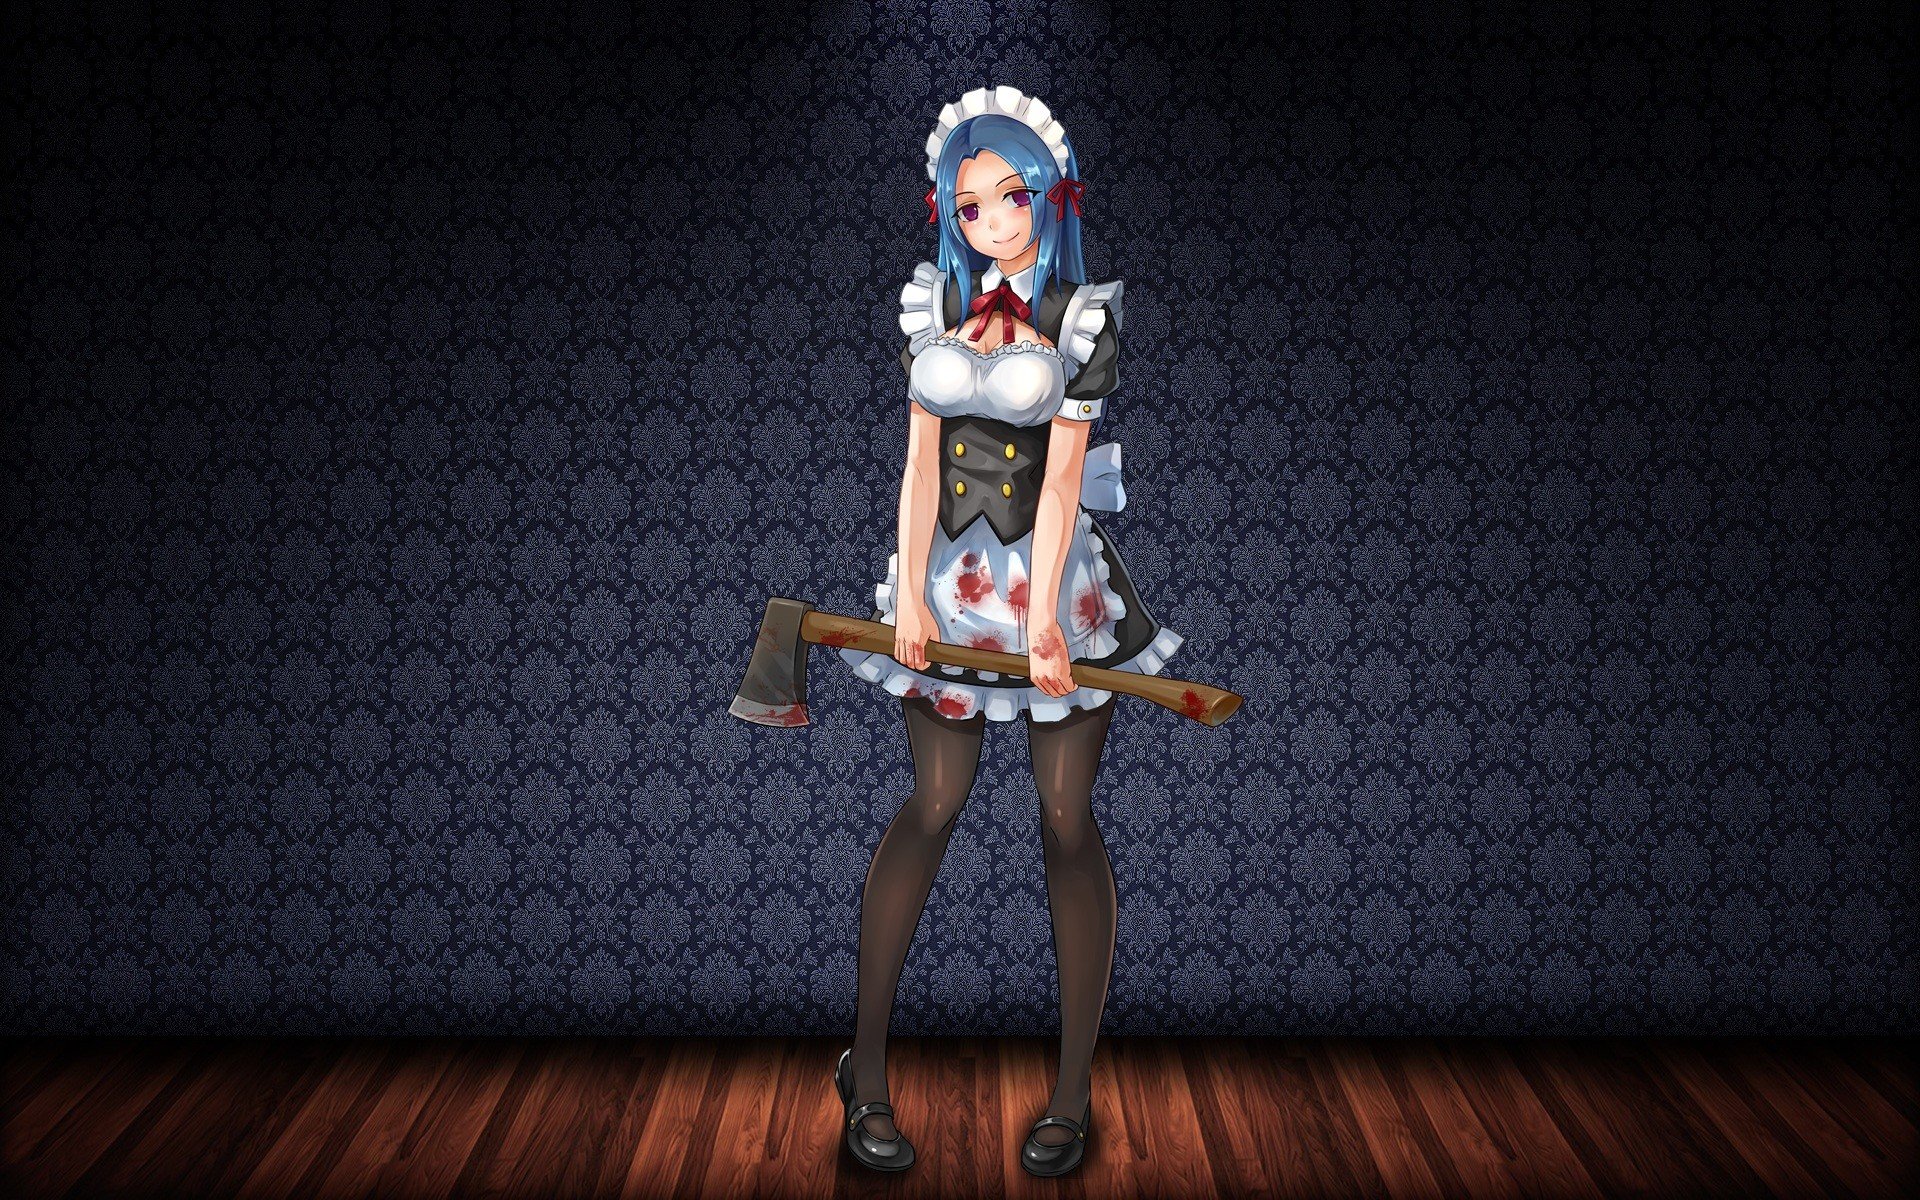 anime, Blood, Anime girls, Axes, Maid outfit, Red eyes, Blue hair, Original characters Wallpaper